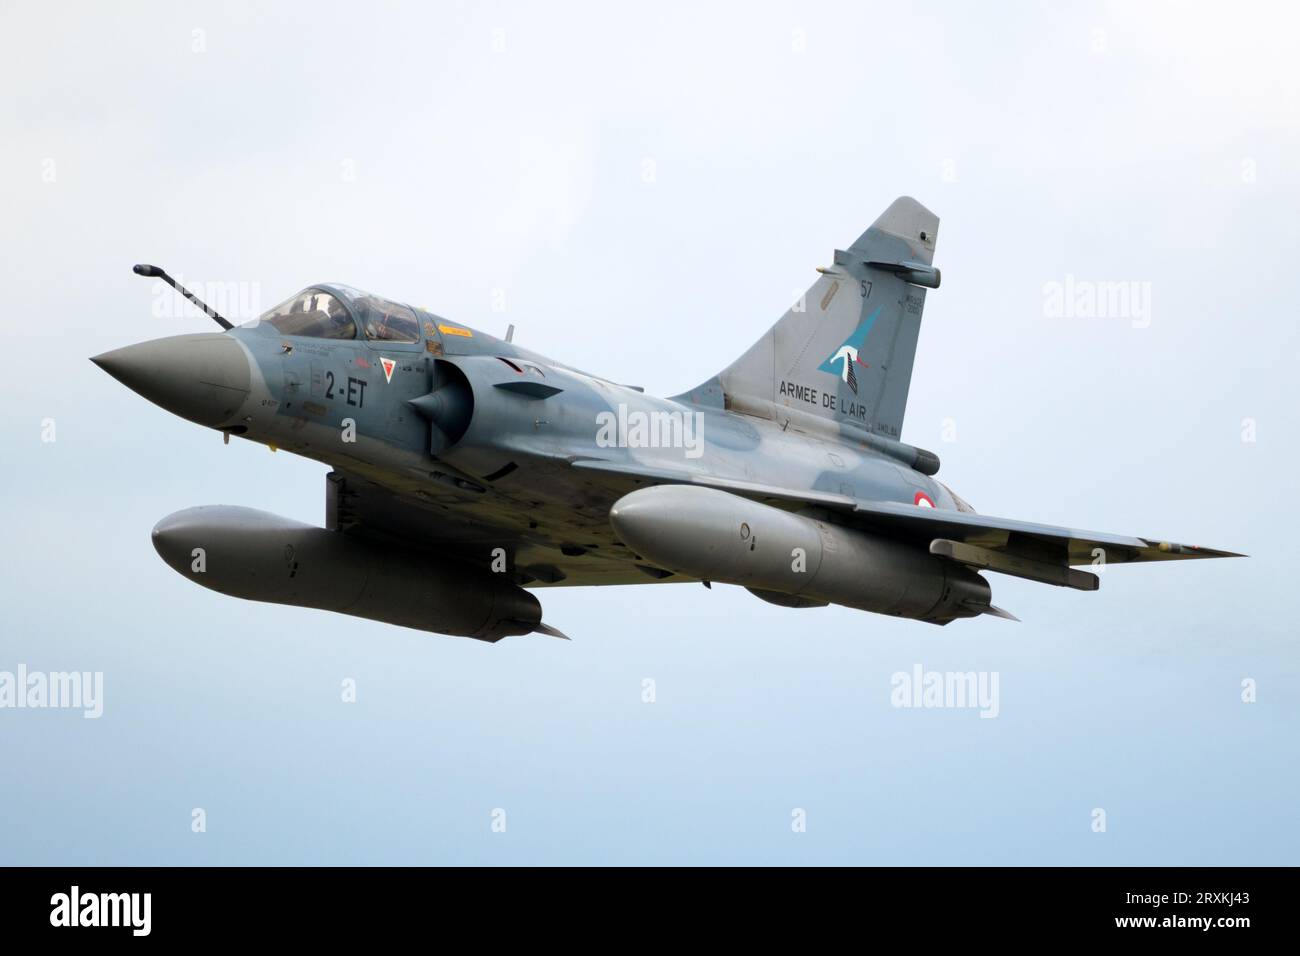 French Air Force Dassault Mirage 2000 fighter jet aircraft in flight at Florennes Air Base, Belgium - June 15, 2017 Stock Photo